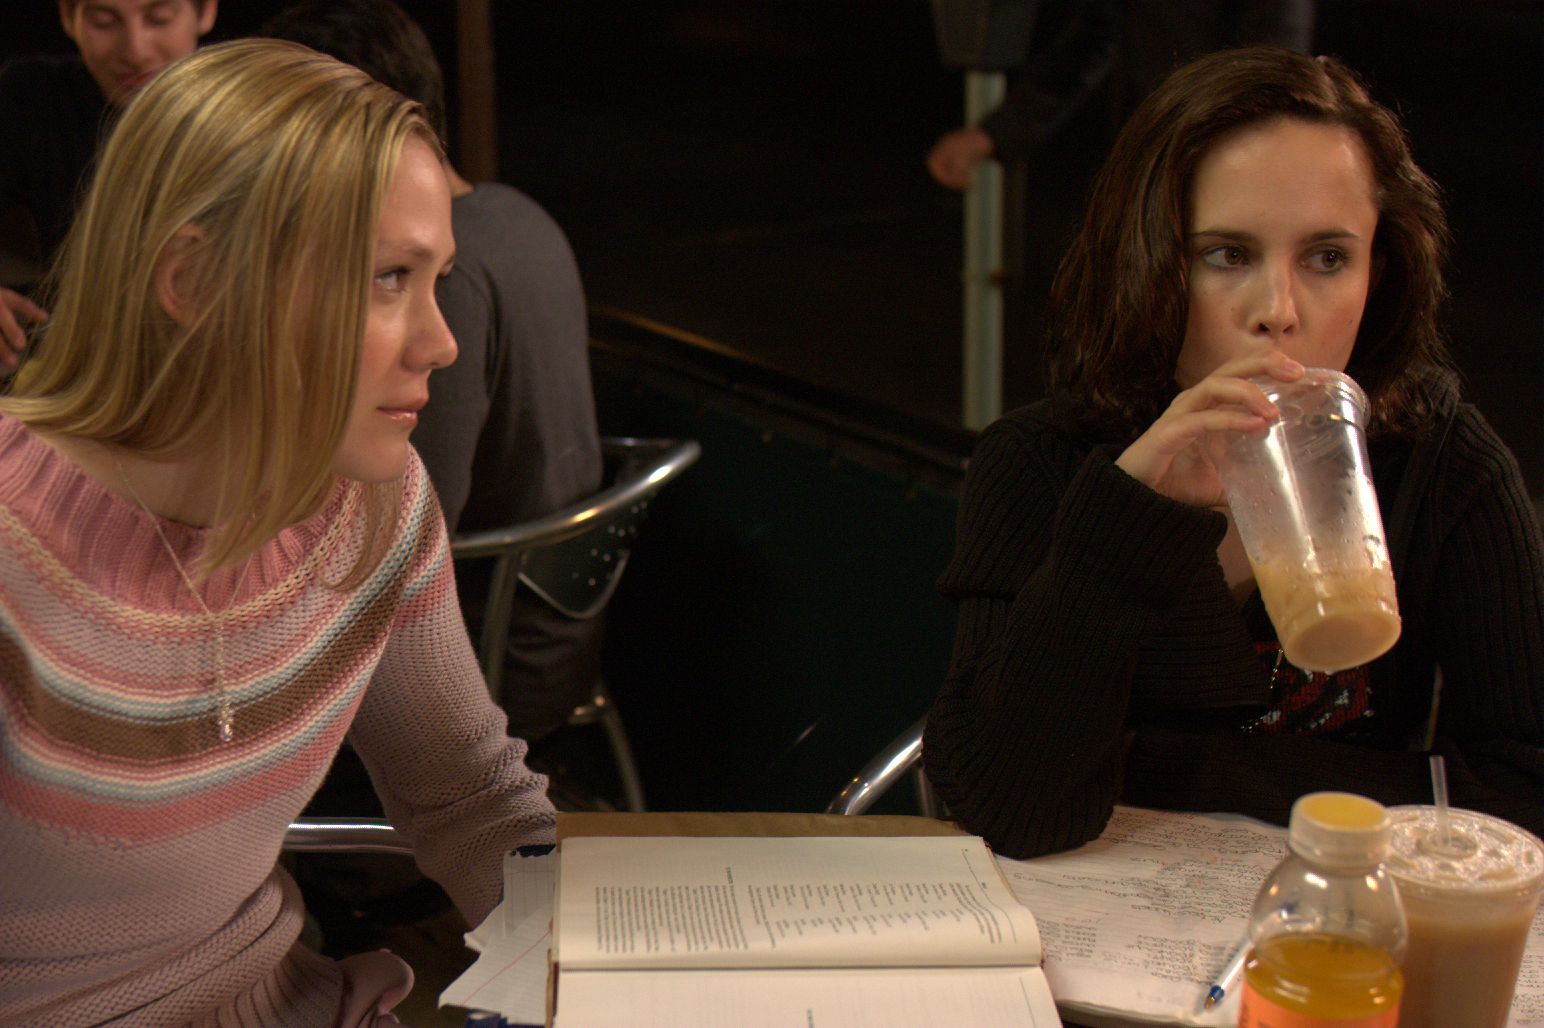 Lauren Birkell as Melissa and Louisa Krause as Brenda in Peace Arch Entertainment's The Babysitters (2008)